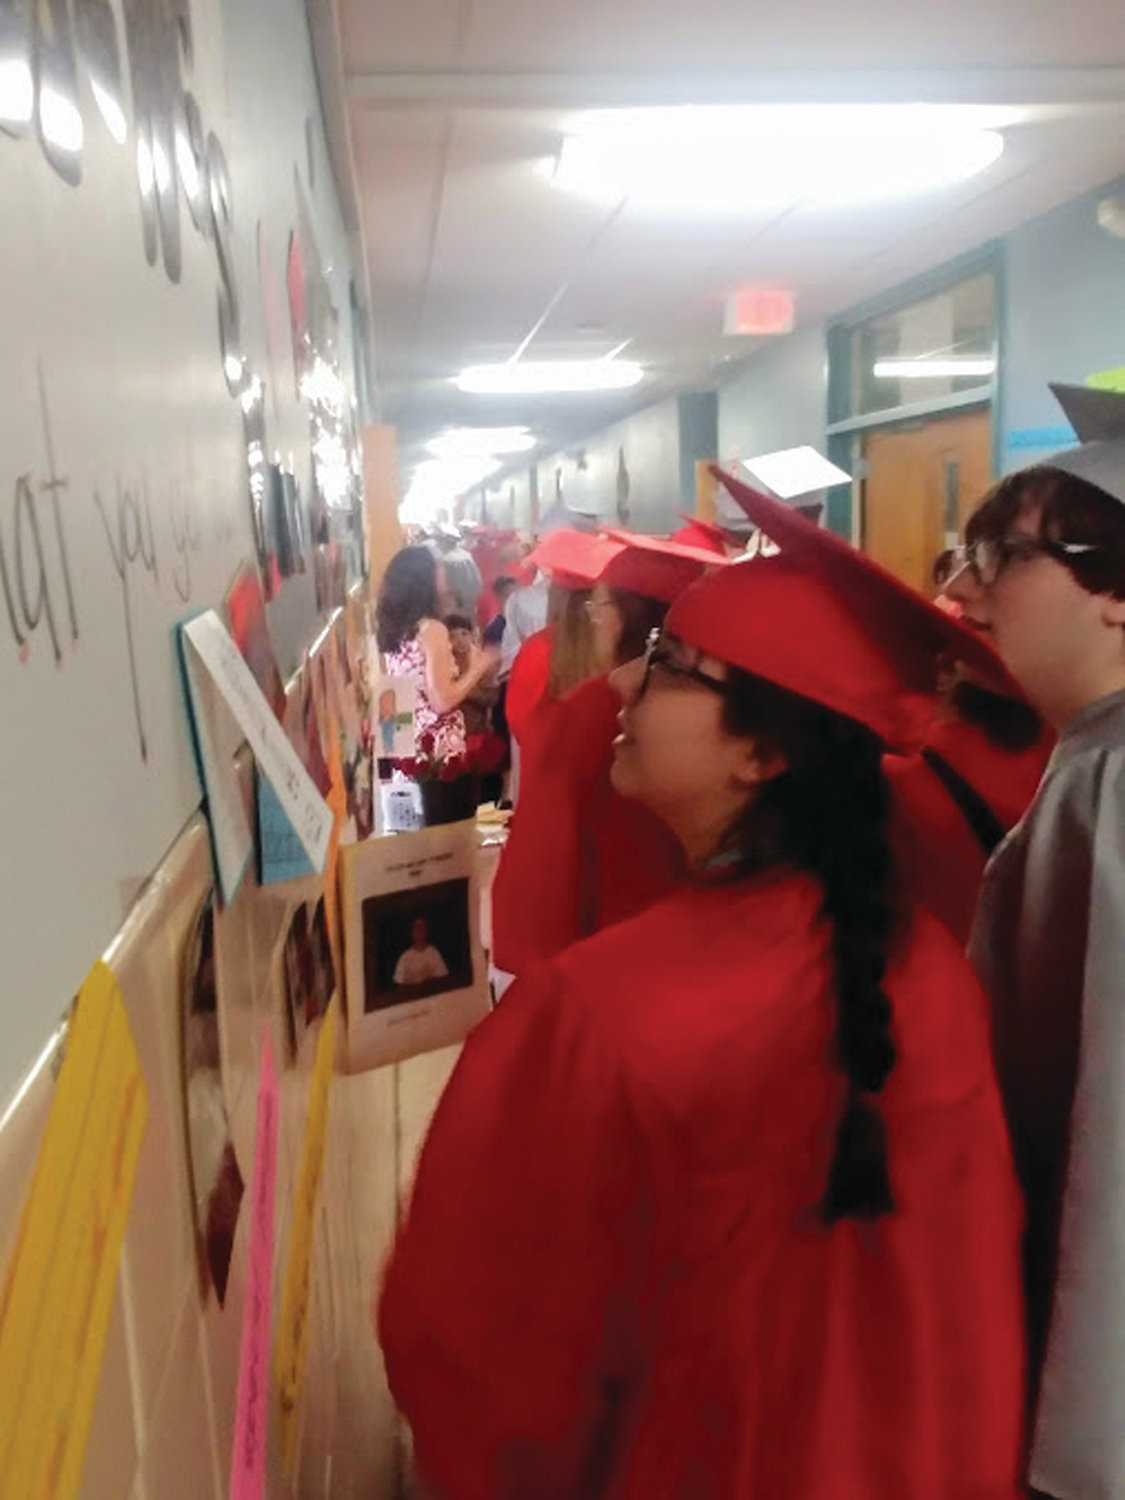 FOND MEMORIES: Ariana Deal and Nicholas Notarianni look through the photos and classwork posted on the walls of third-grade teacher Lisa Davis’ hallway, where she showcased their work, notes and photographs from many years ago.